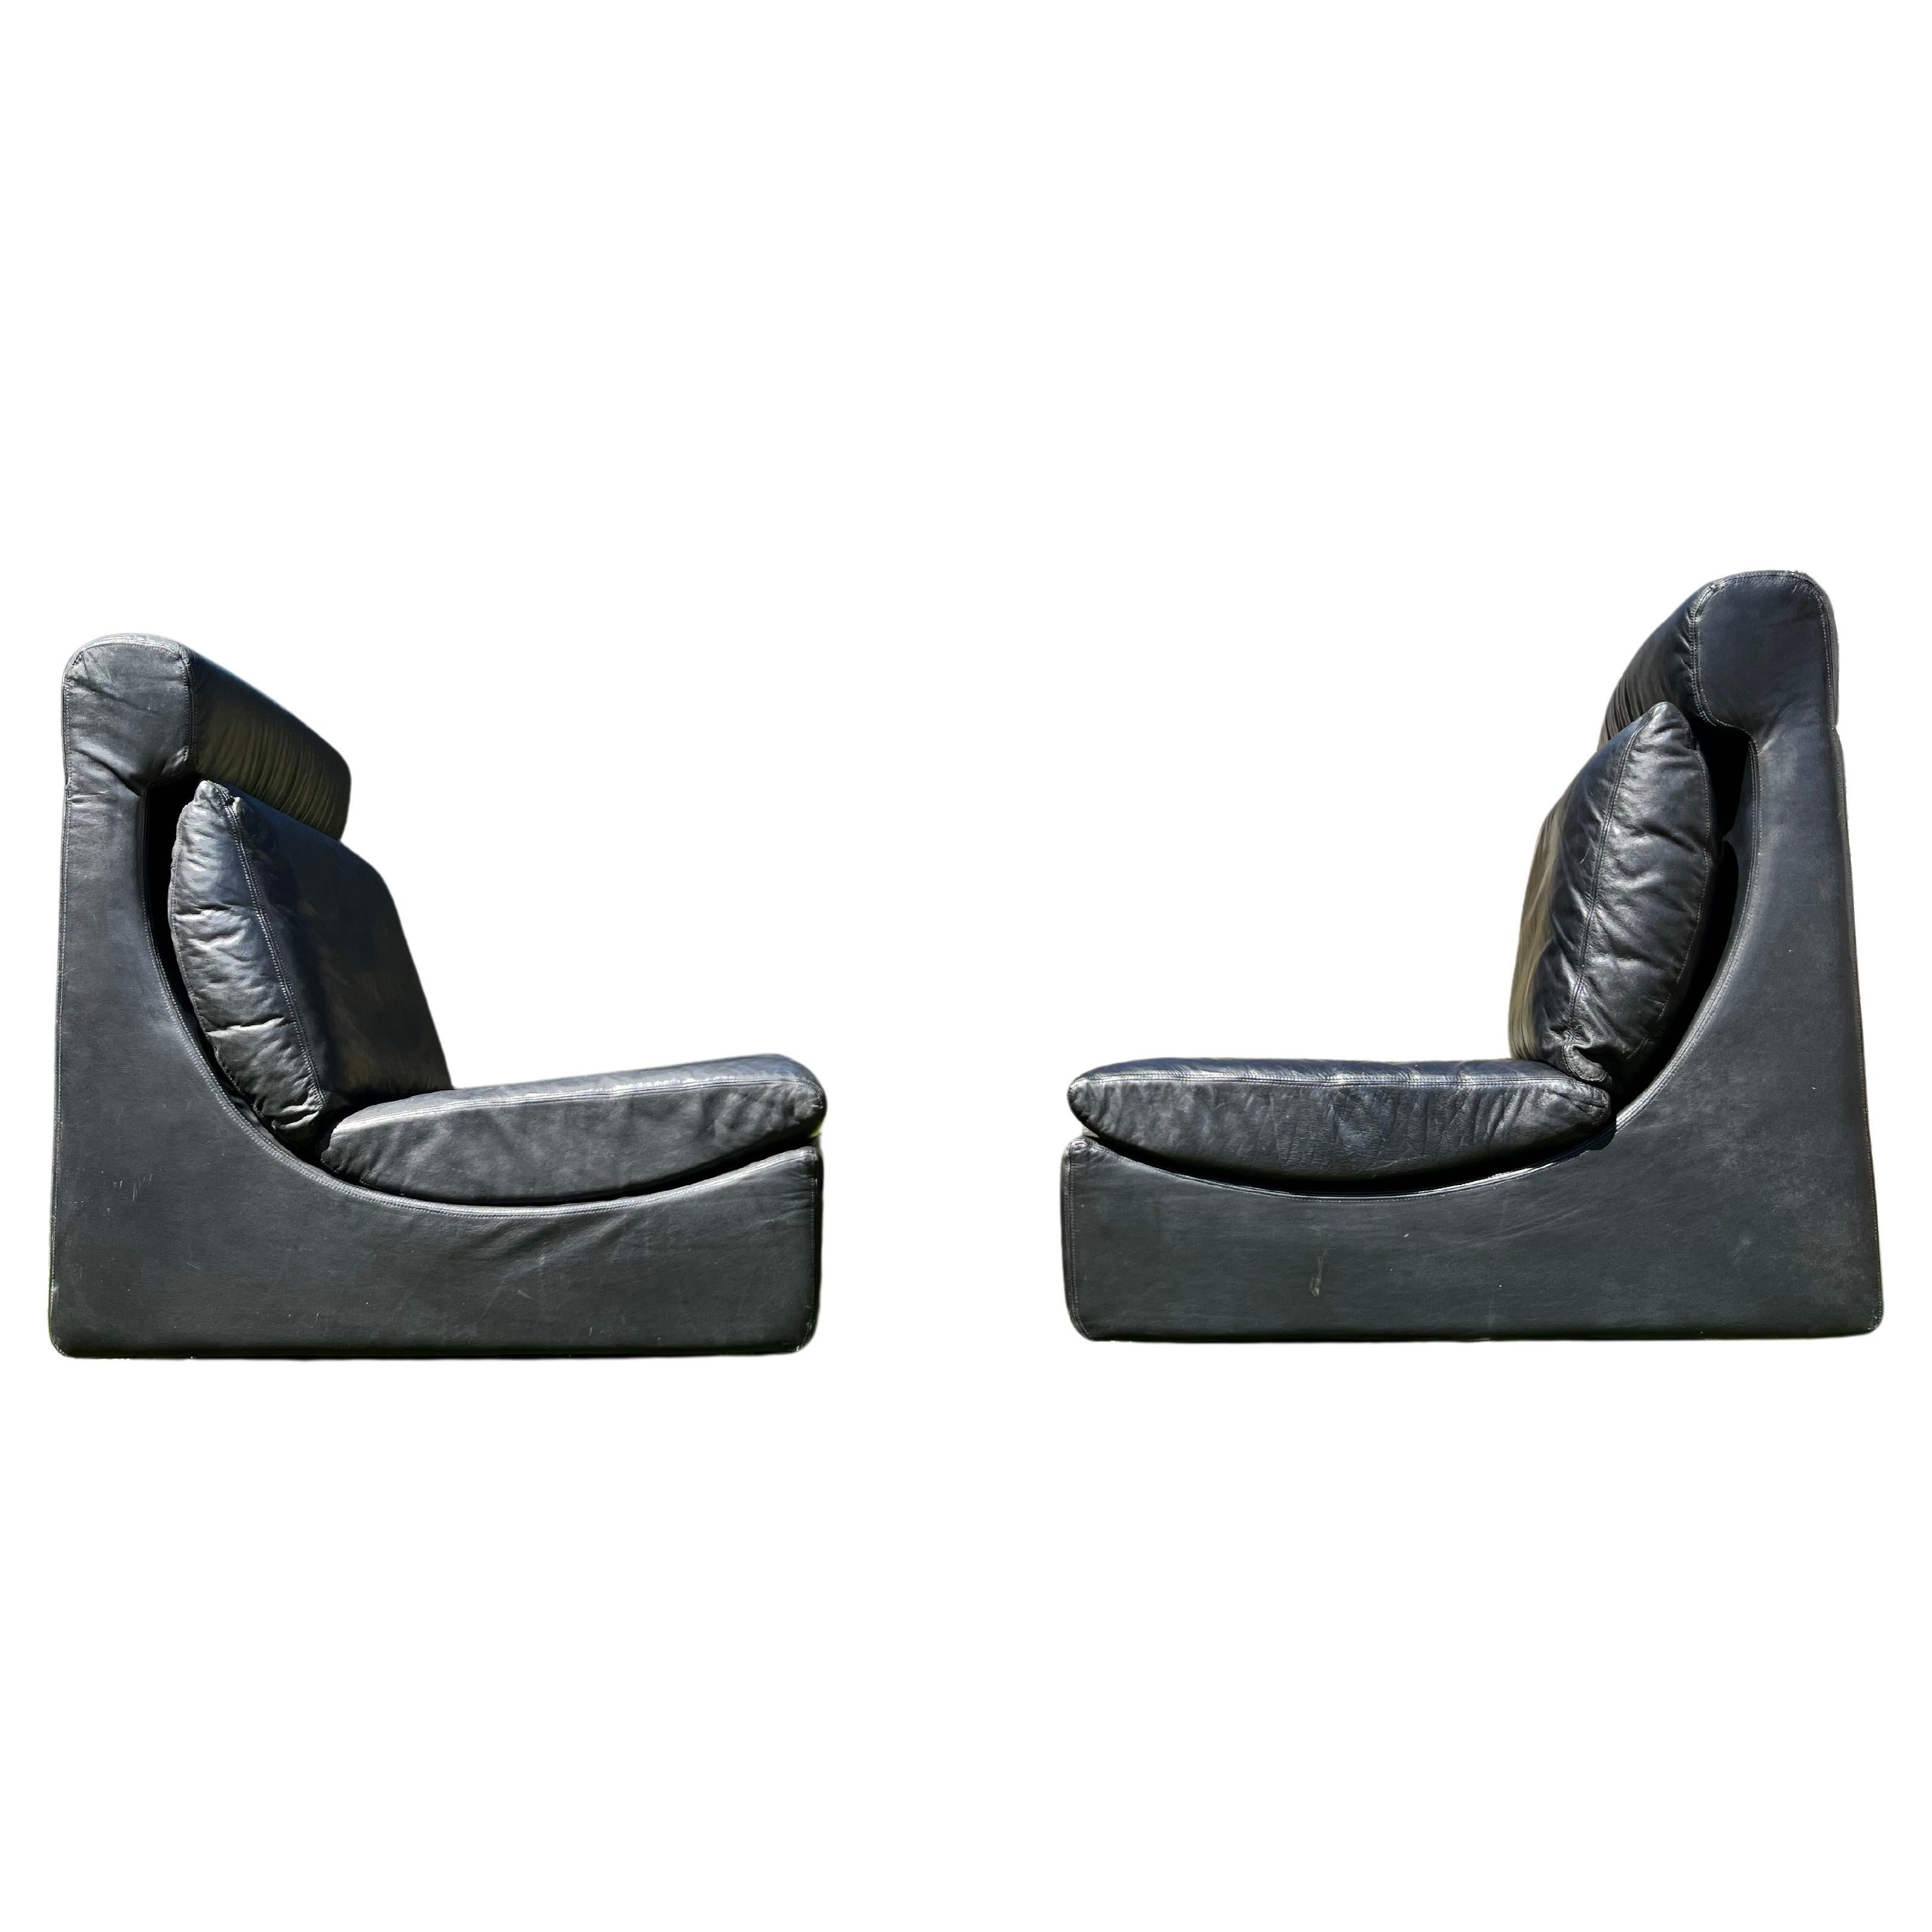 Pair of Two Black Leather Modular Sofa Chairs by Walter Knoll, Germany, 1970s